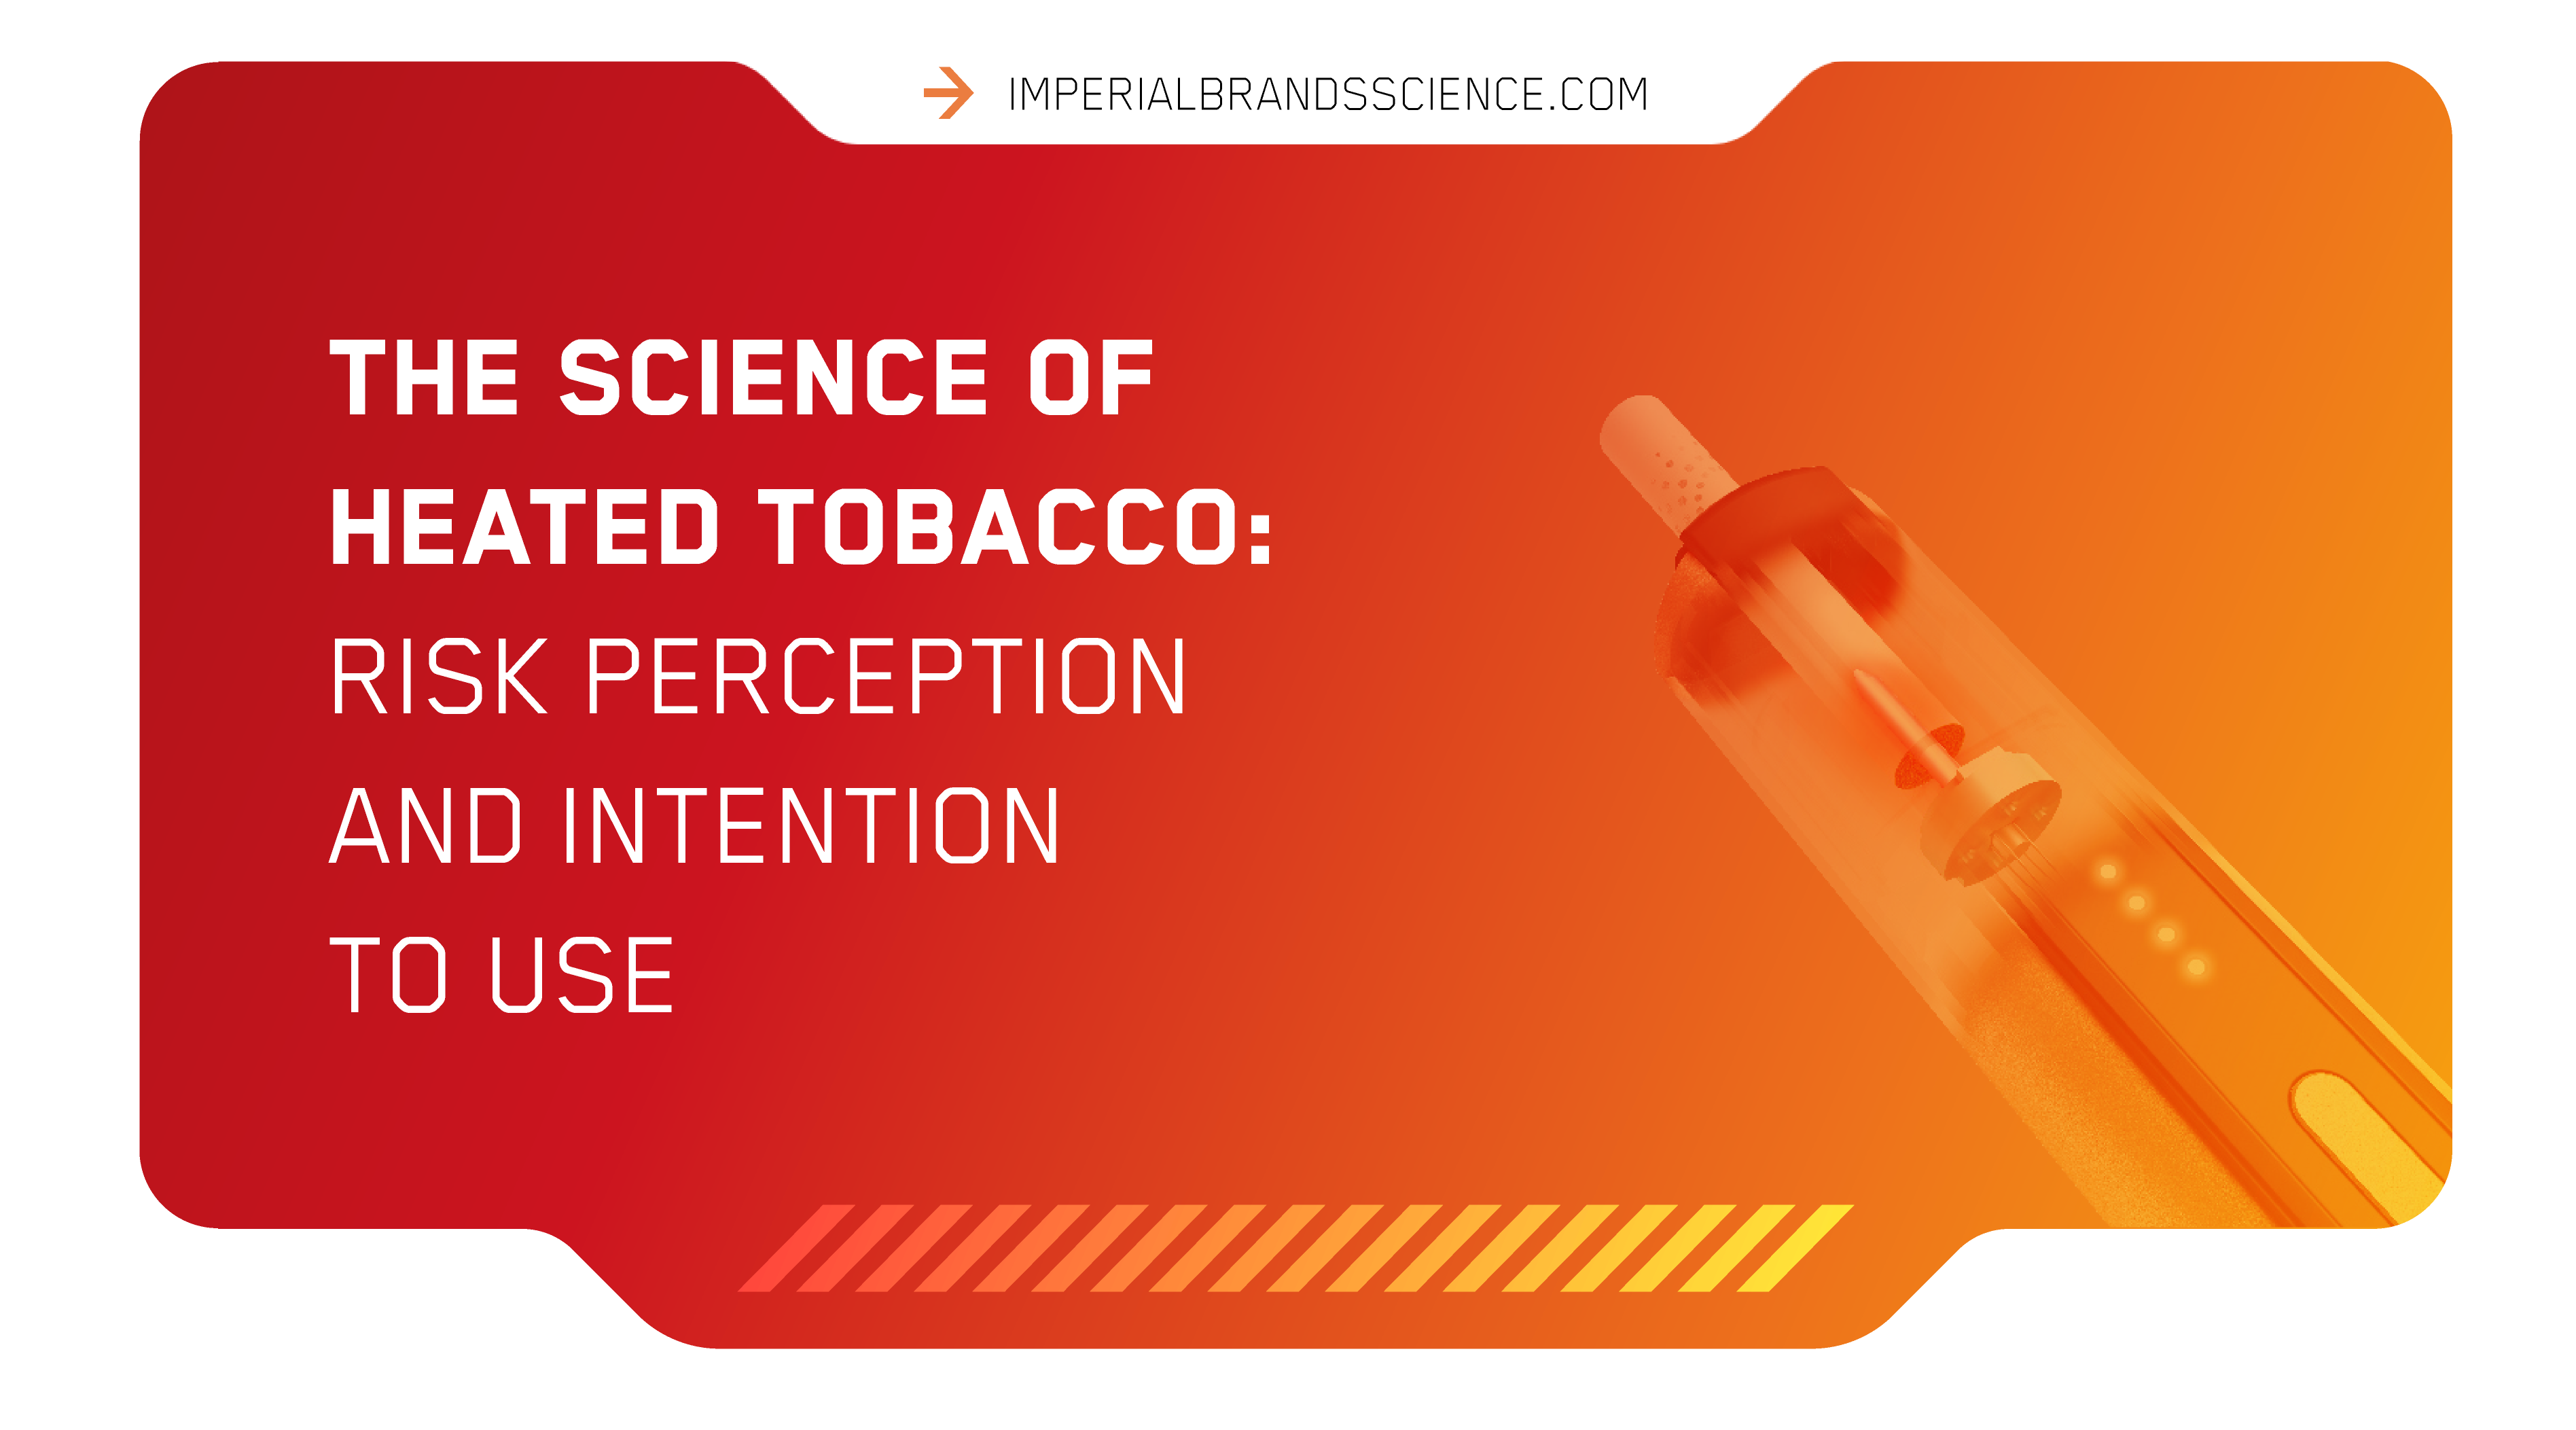 The Science of Heated Tobacco: Risk Perception and Intention to Use